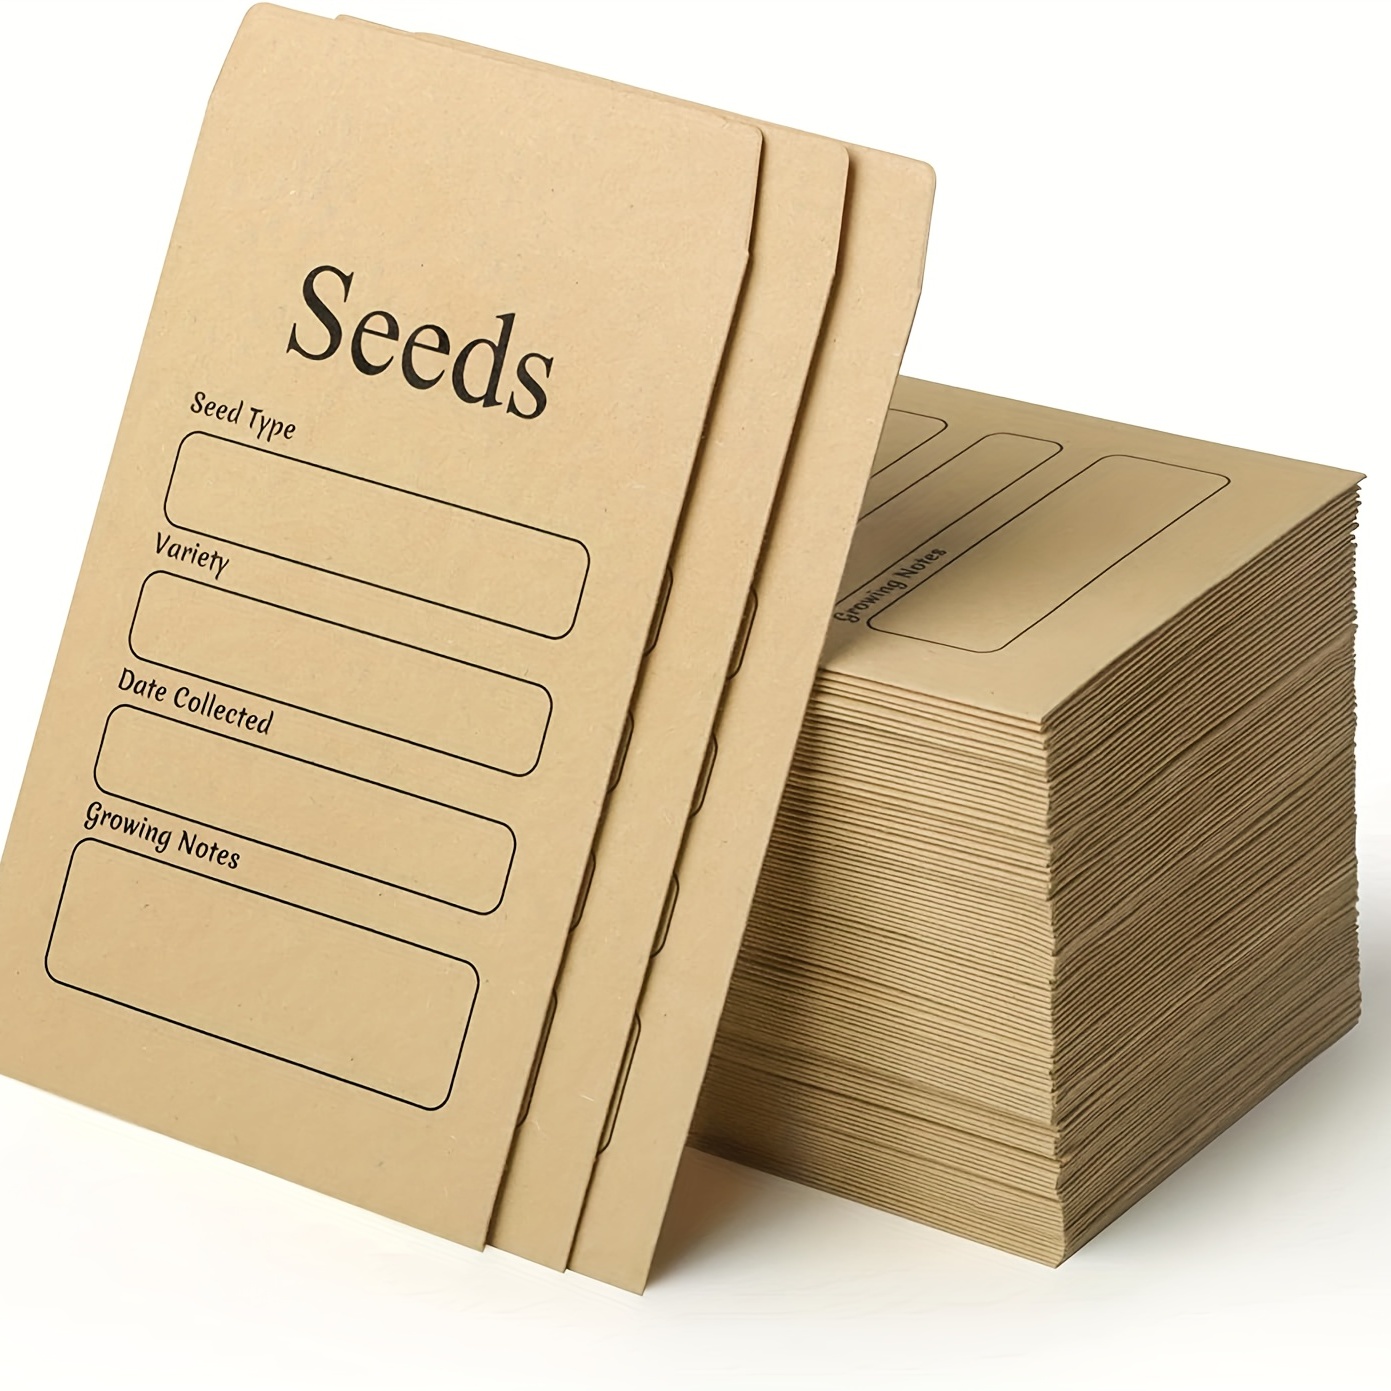 

20pcs, Seed Envelopes Small Self-adhesive Sealing Sead Envelopes Kraft Seed Saving Packets 2.36 X 3.14 Inches For Collecting Flowers Vegetables Seed